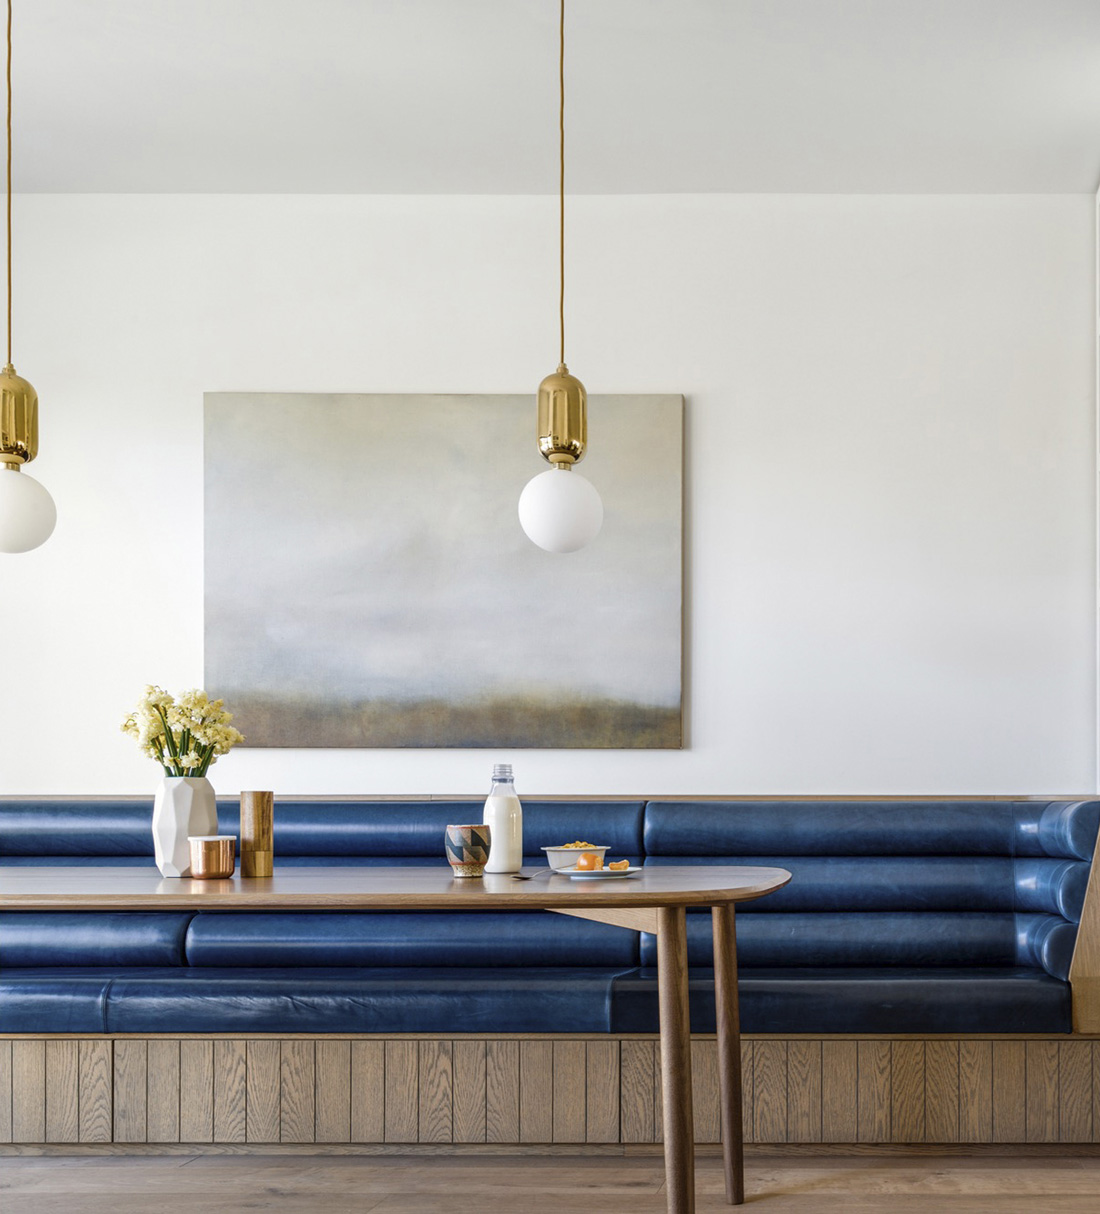 Dining Banquette in a Woollhahra Row House by Luigi Rosselli Architects